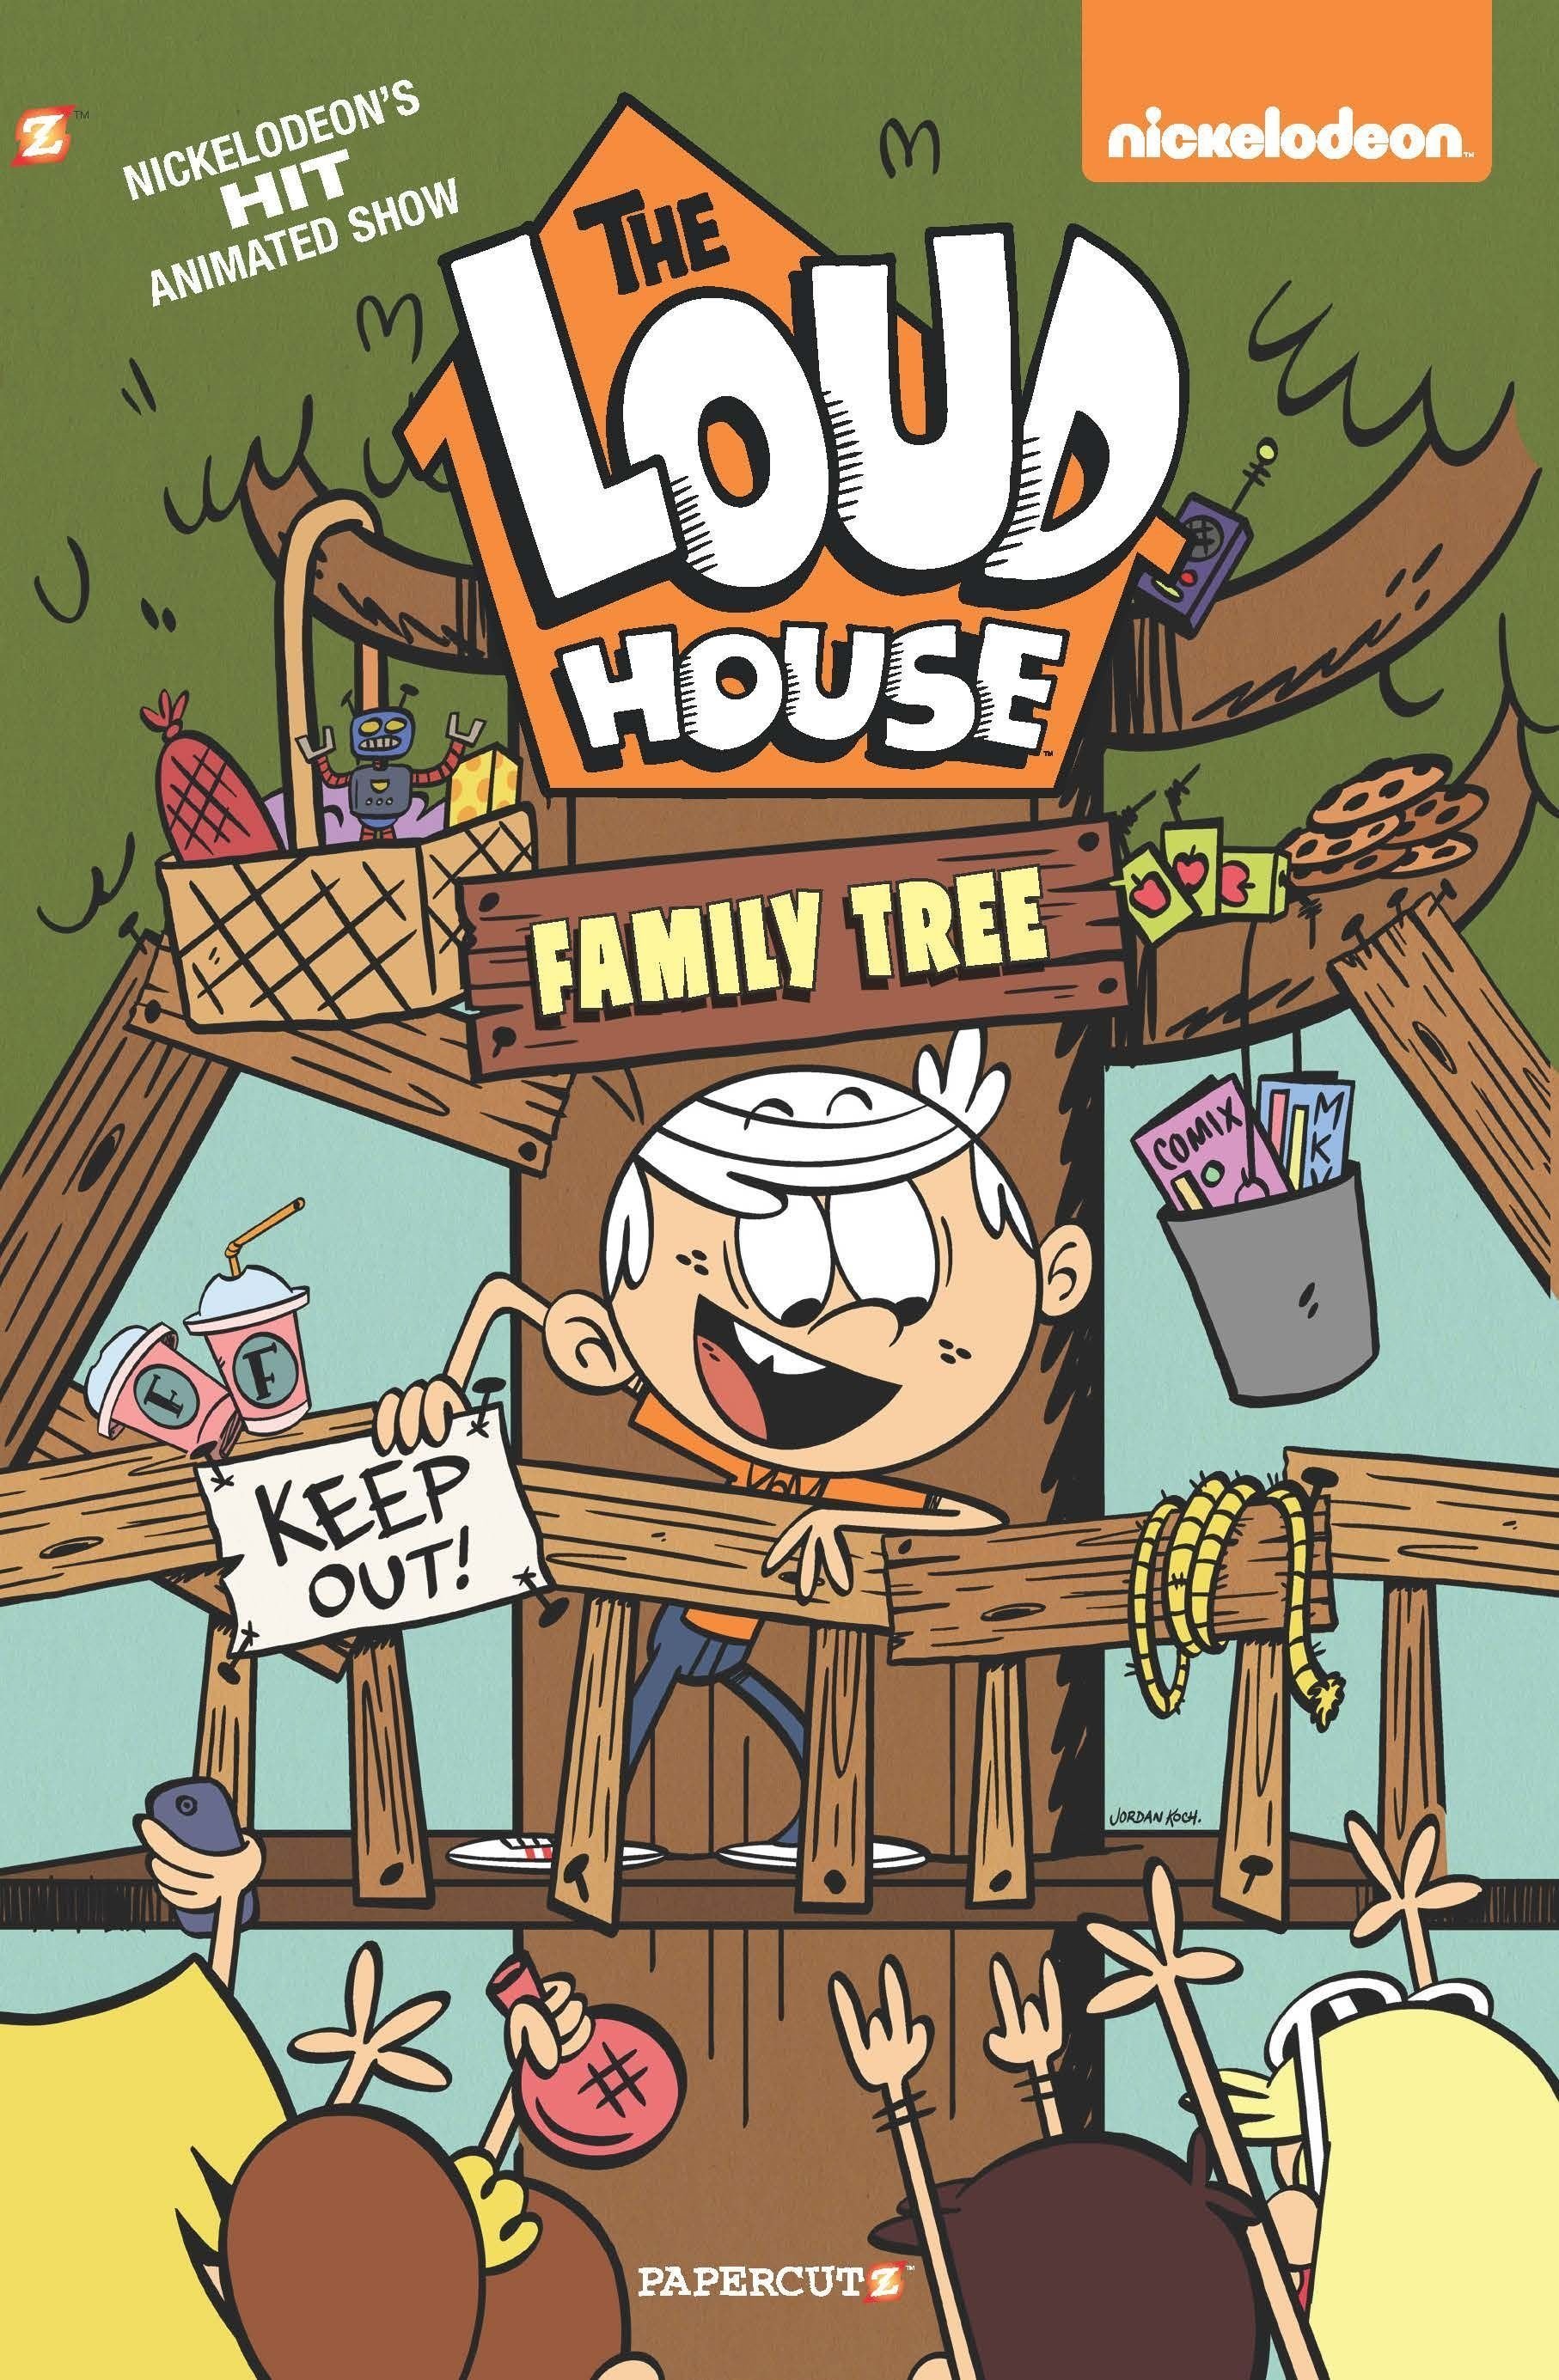 The Loud House #4: The Struggle is Real